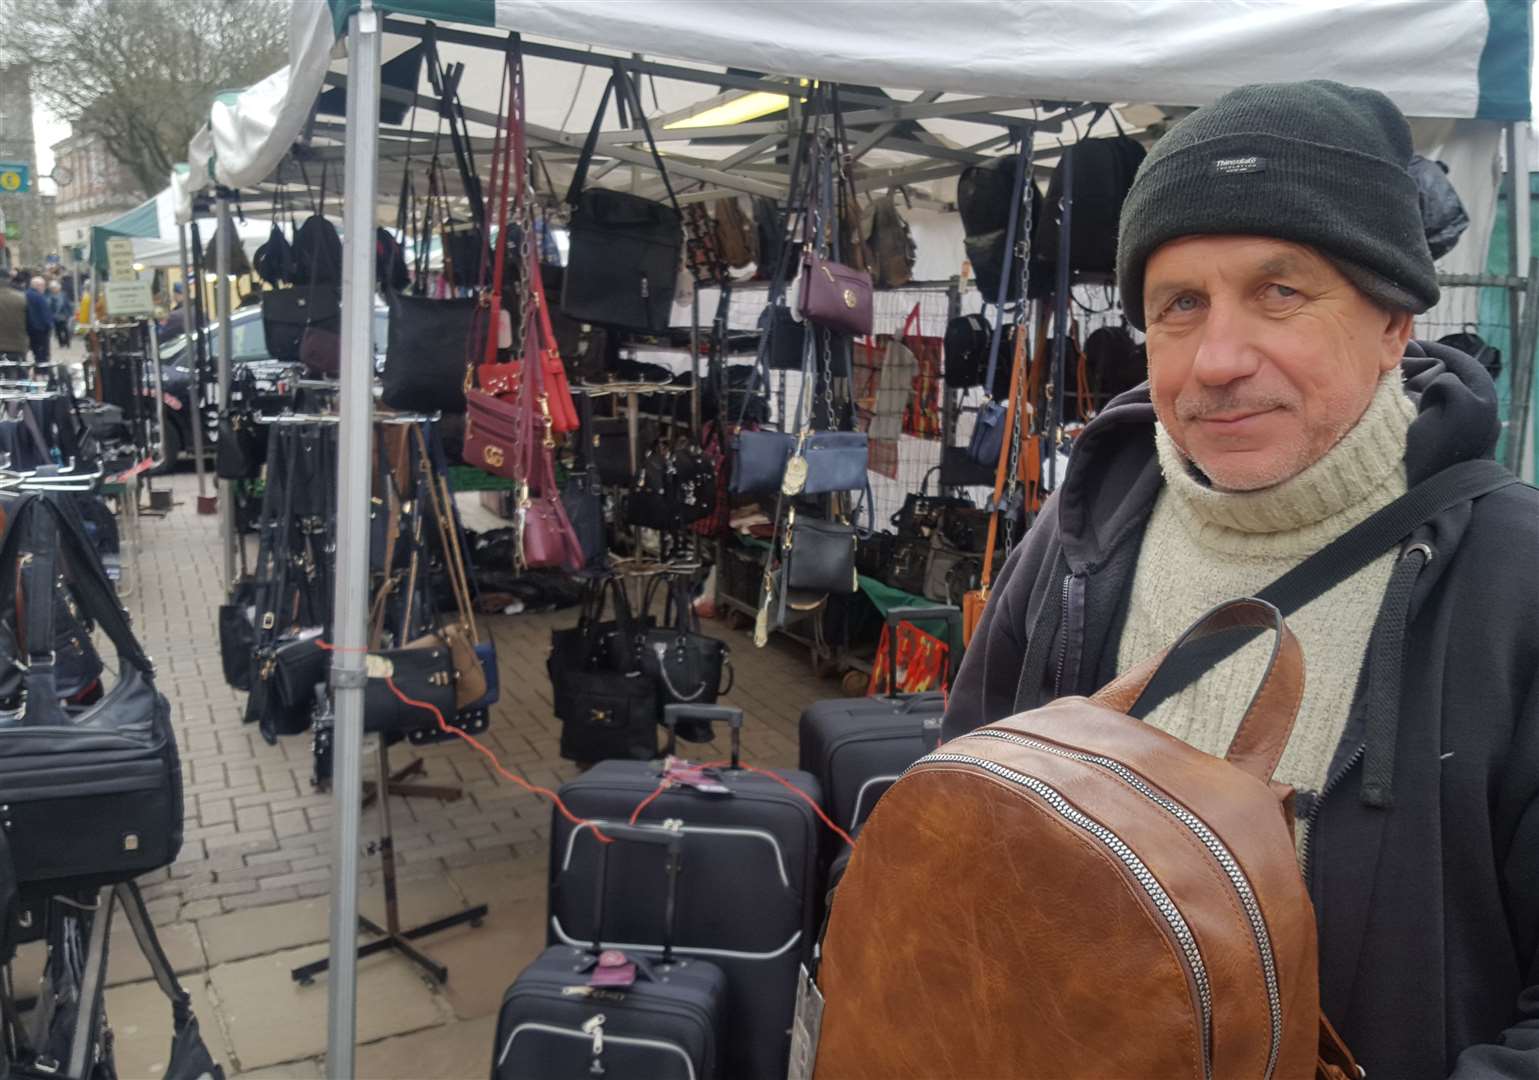 Chris Brenchley who sells bags and luggage